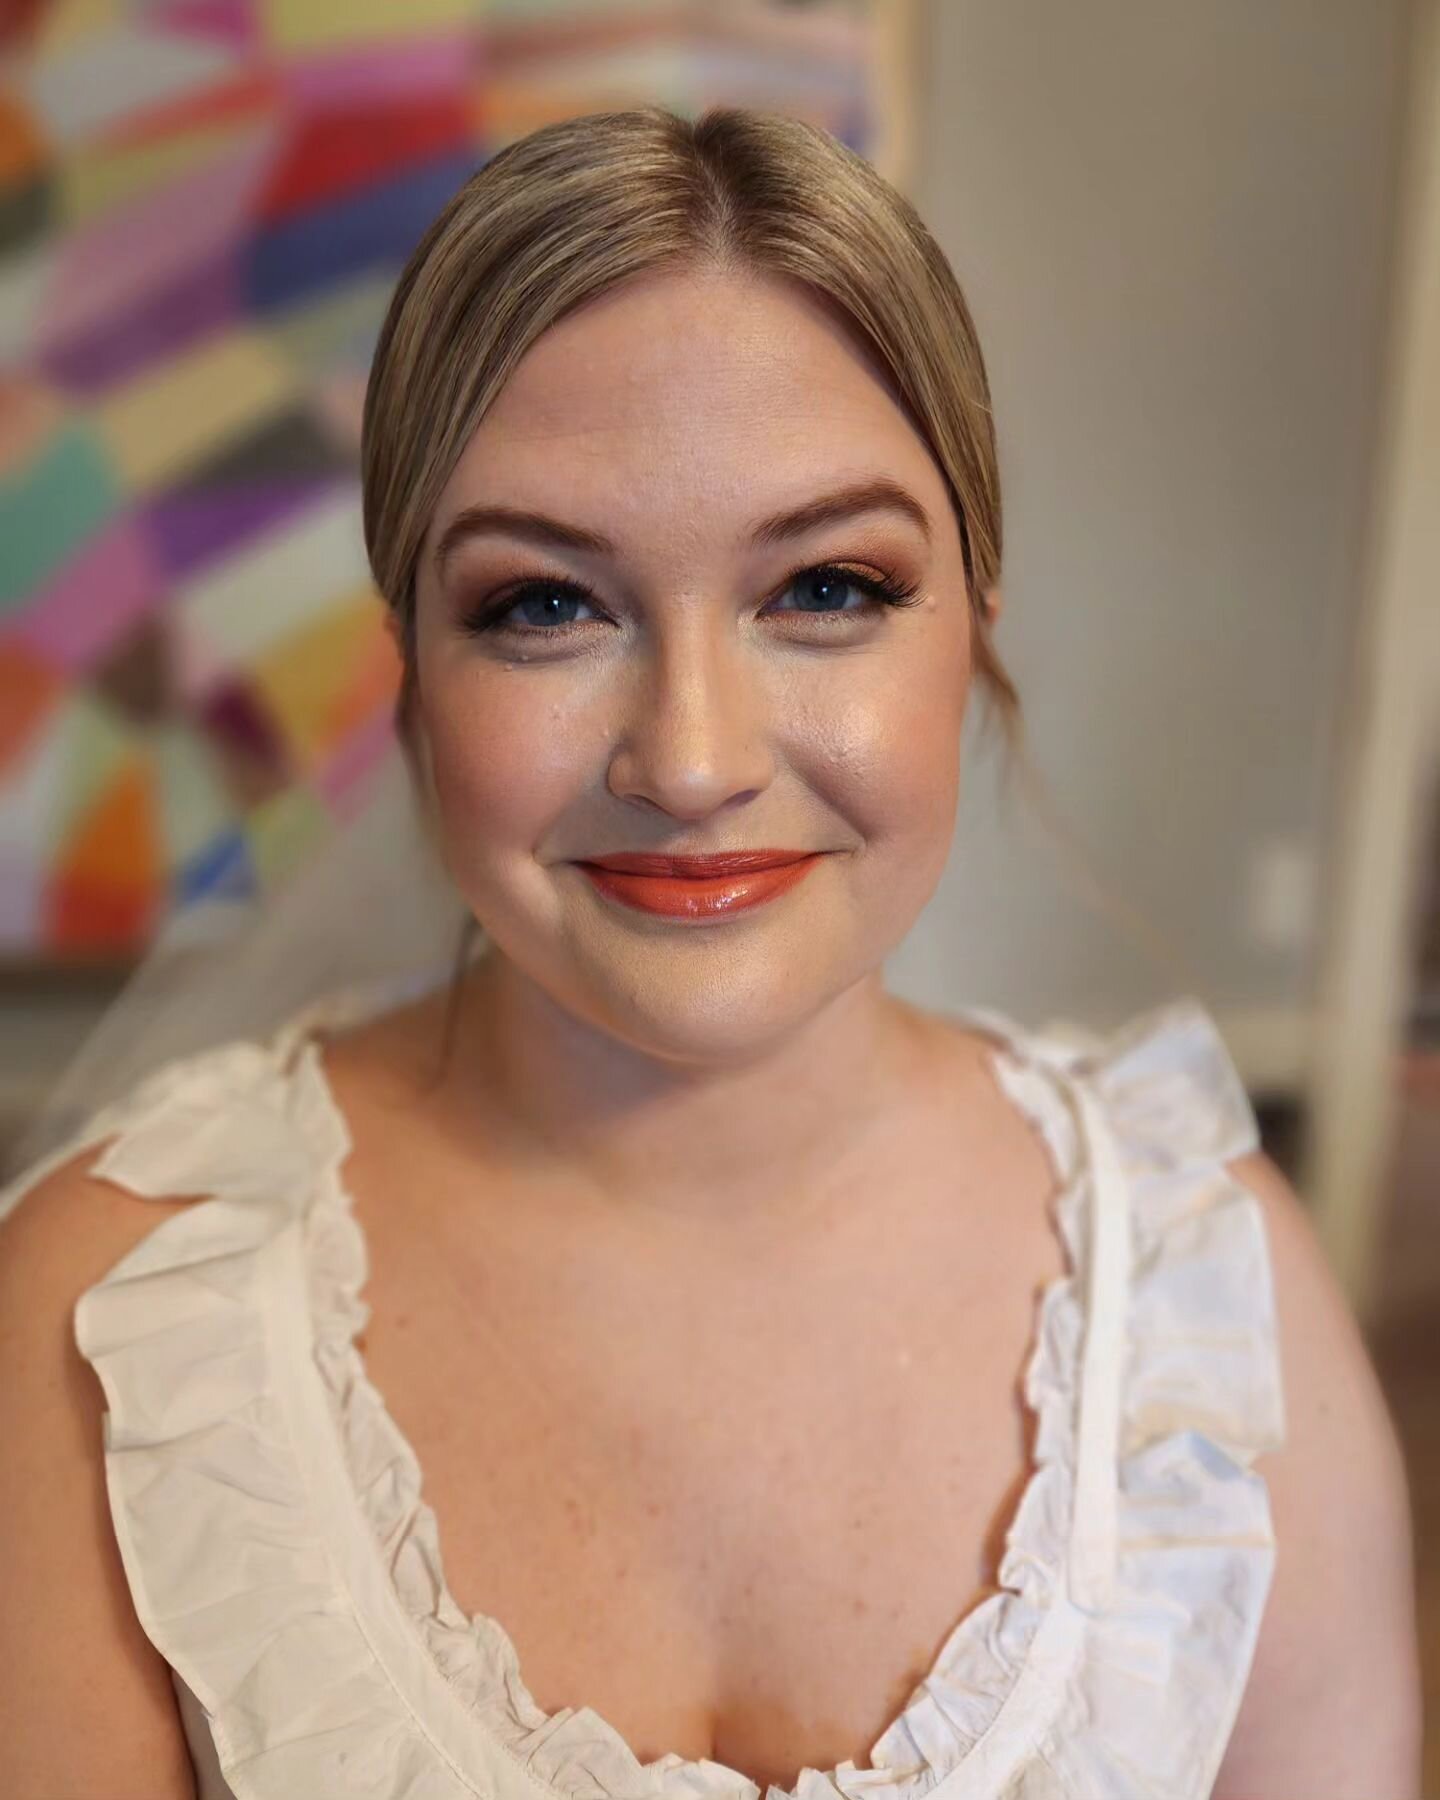 I'm obsessing over our brides entire vibe. Everyone in absolutely stunning (and fun vibrant) dresses, pops of color on the lips and shadows, butterfly clips, citrus accents, and the cutest @etsy veil.
Our bride is wearing @remedyhairextensions in col